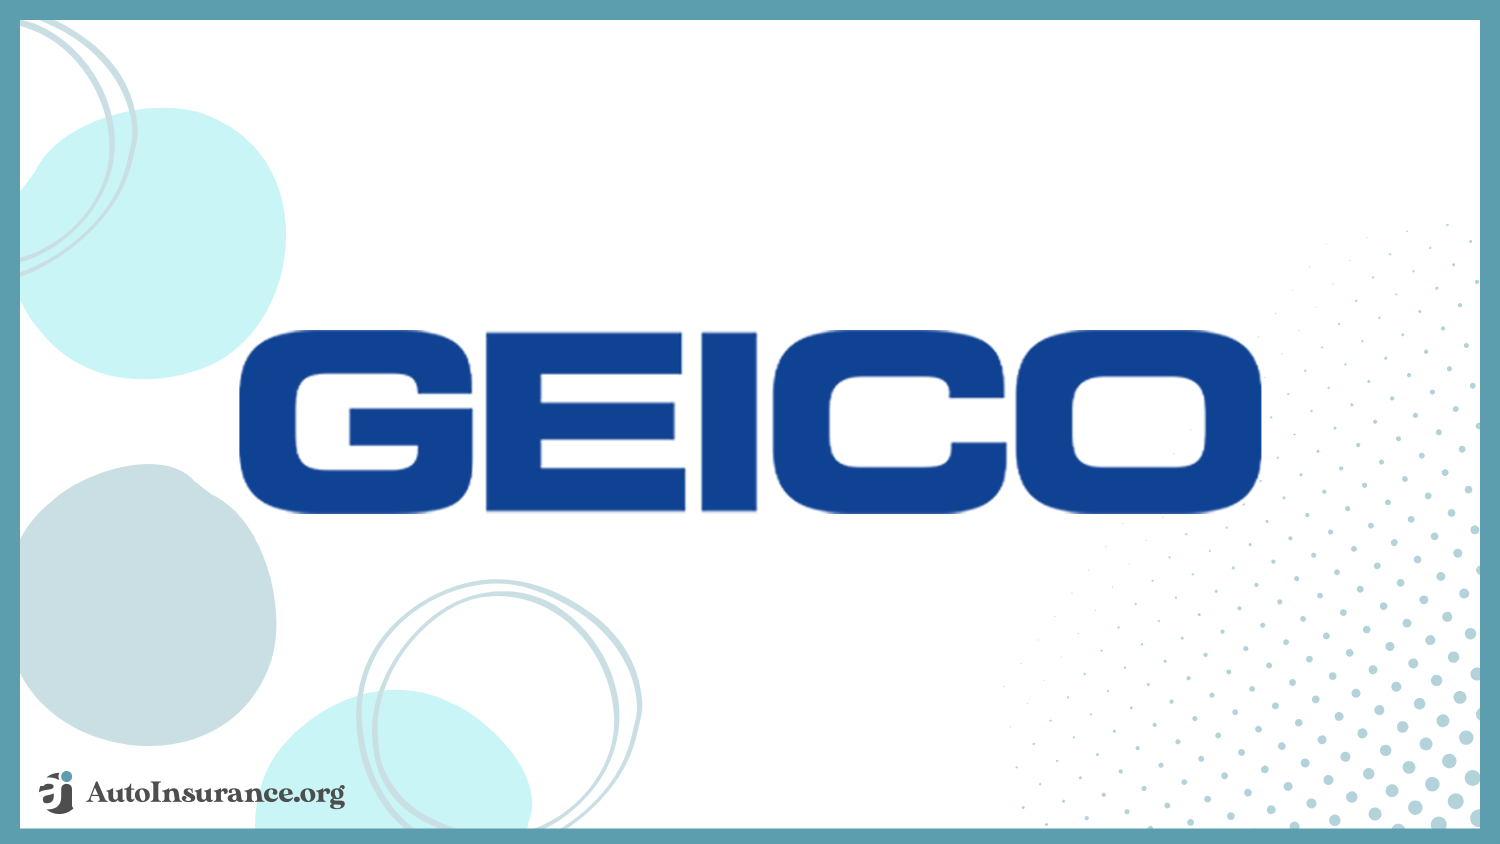 best auto insurance for emergency service workers: Geico